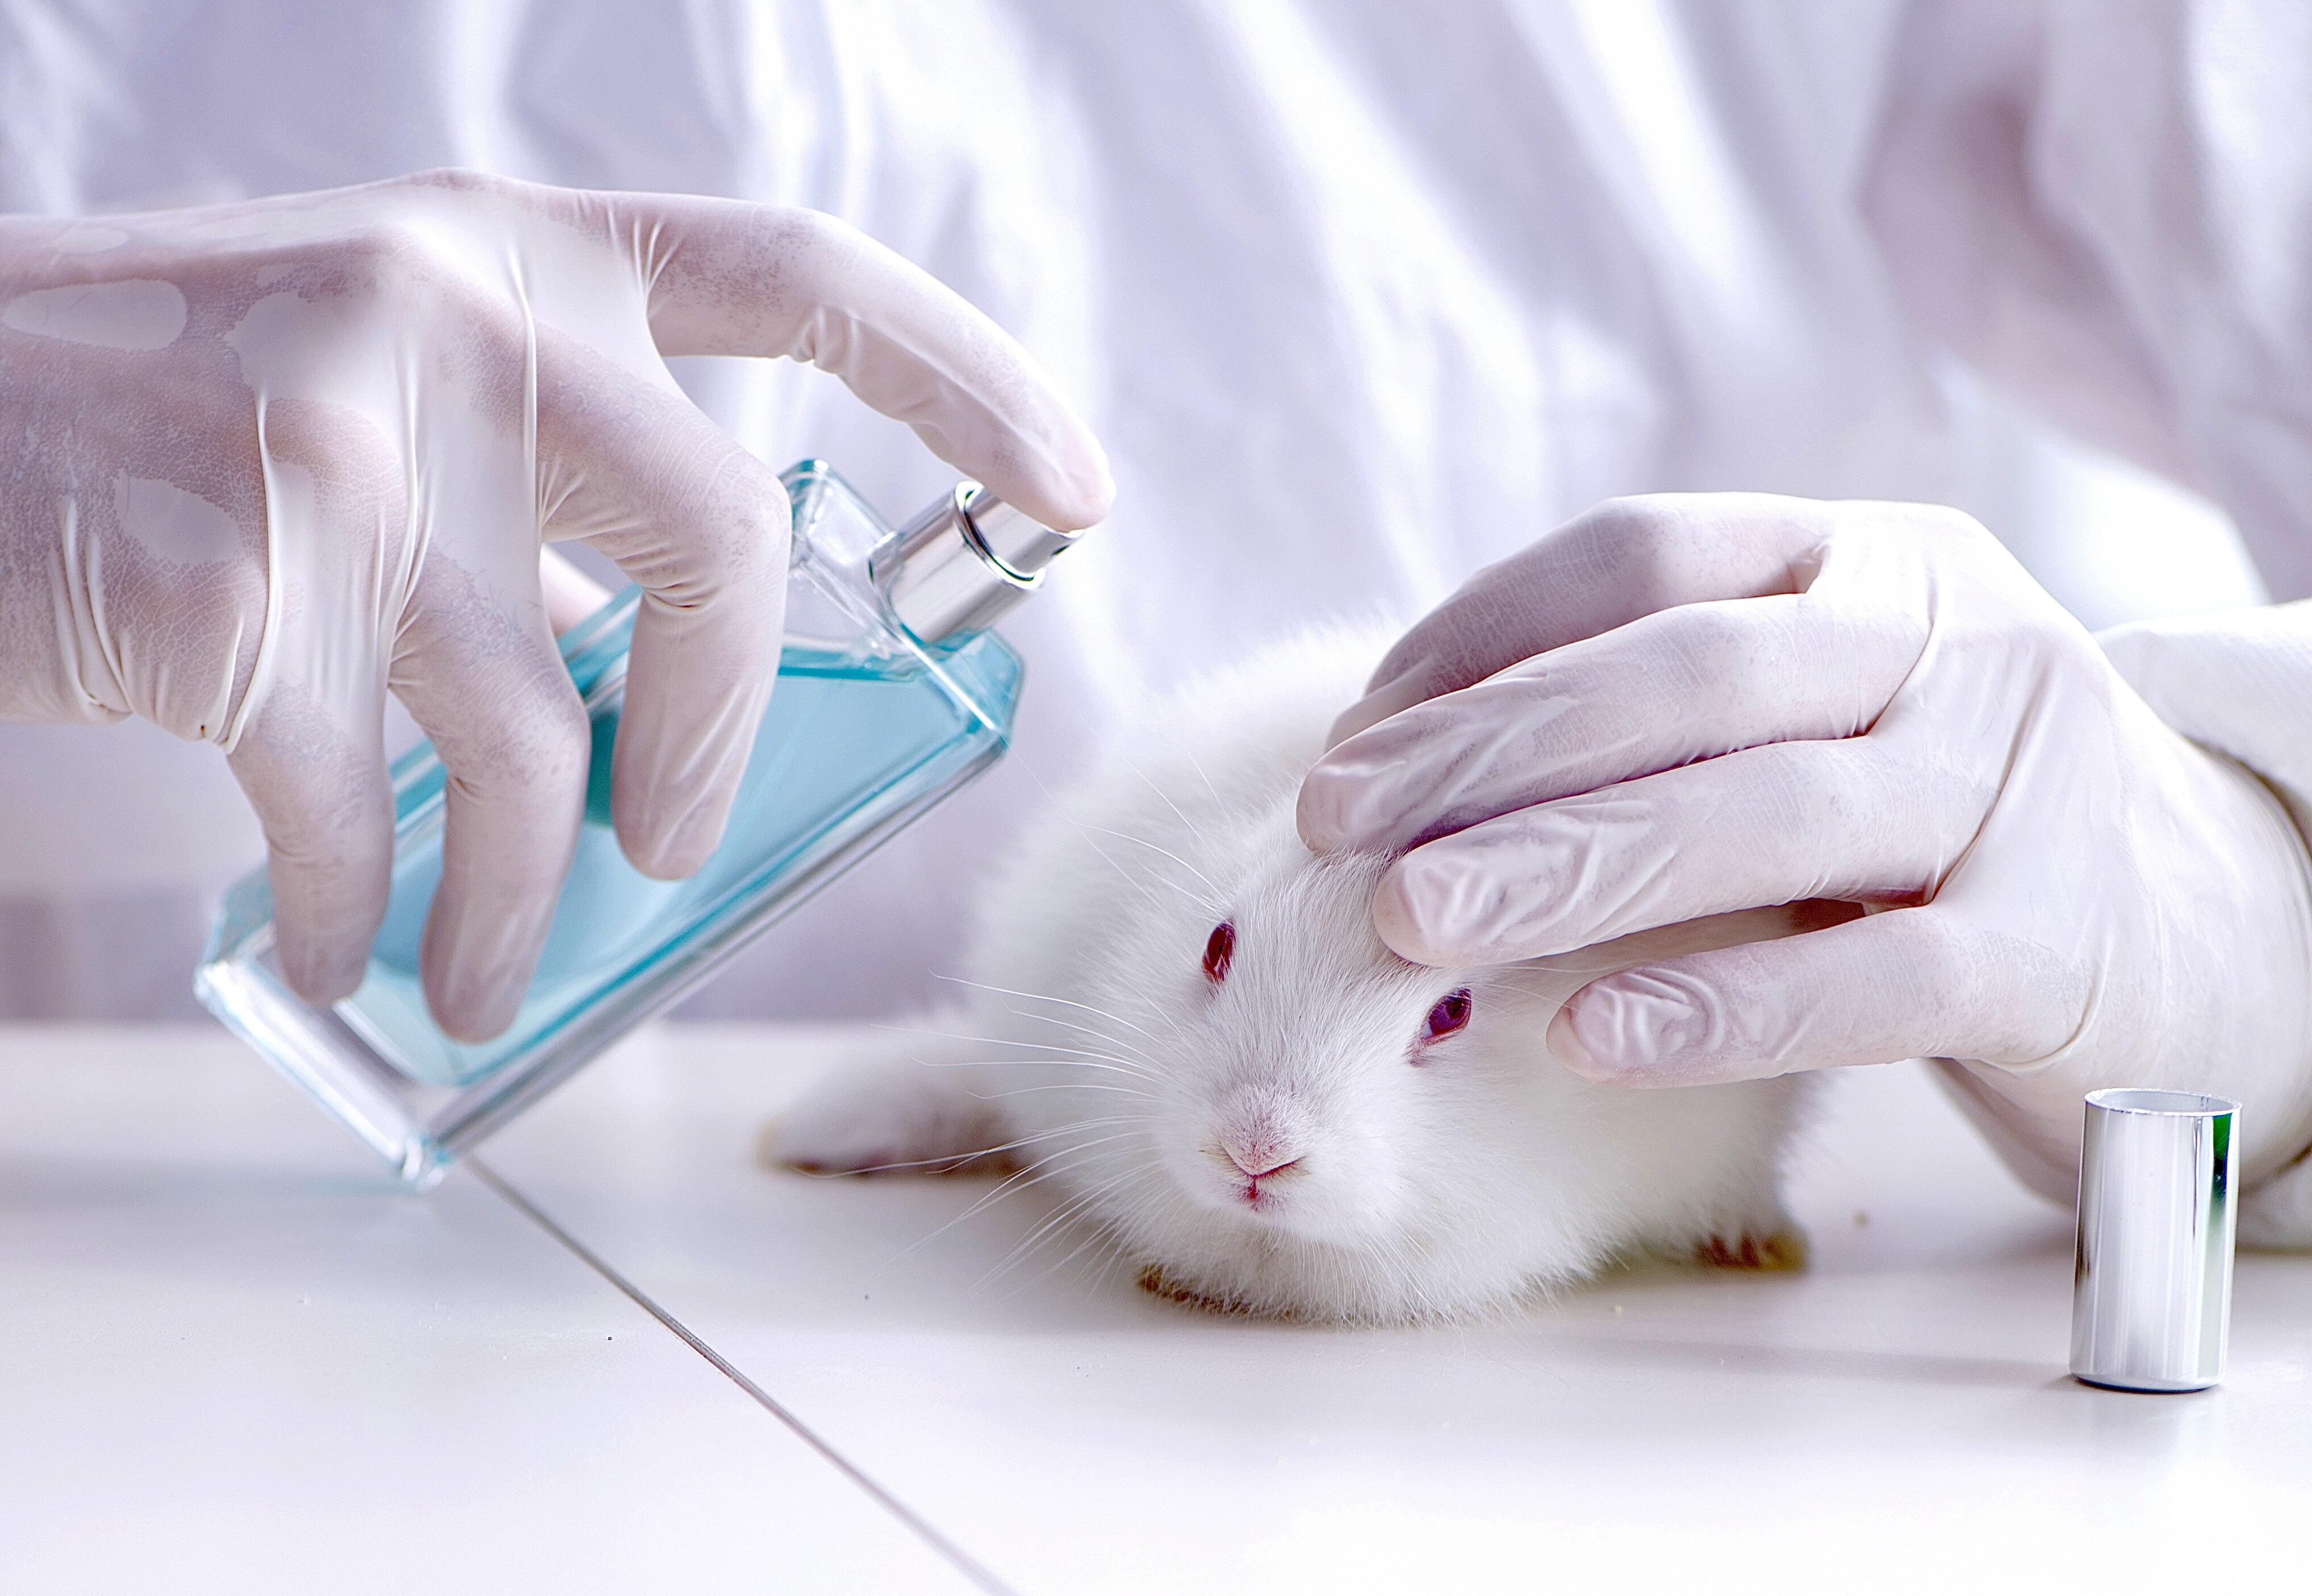 research papers on animal testing for cosmetic